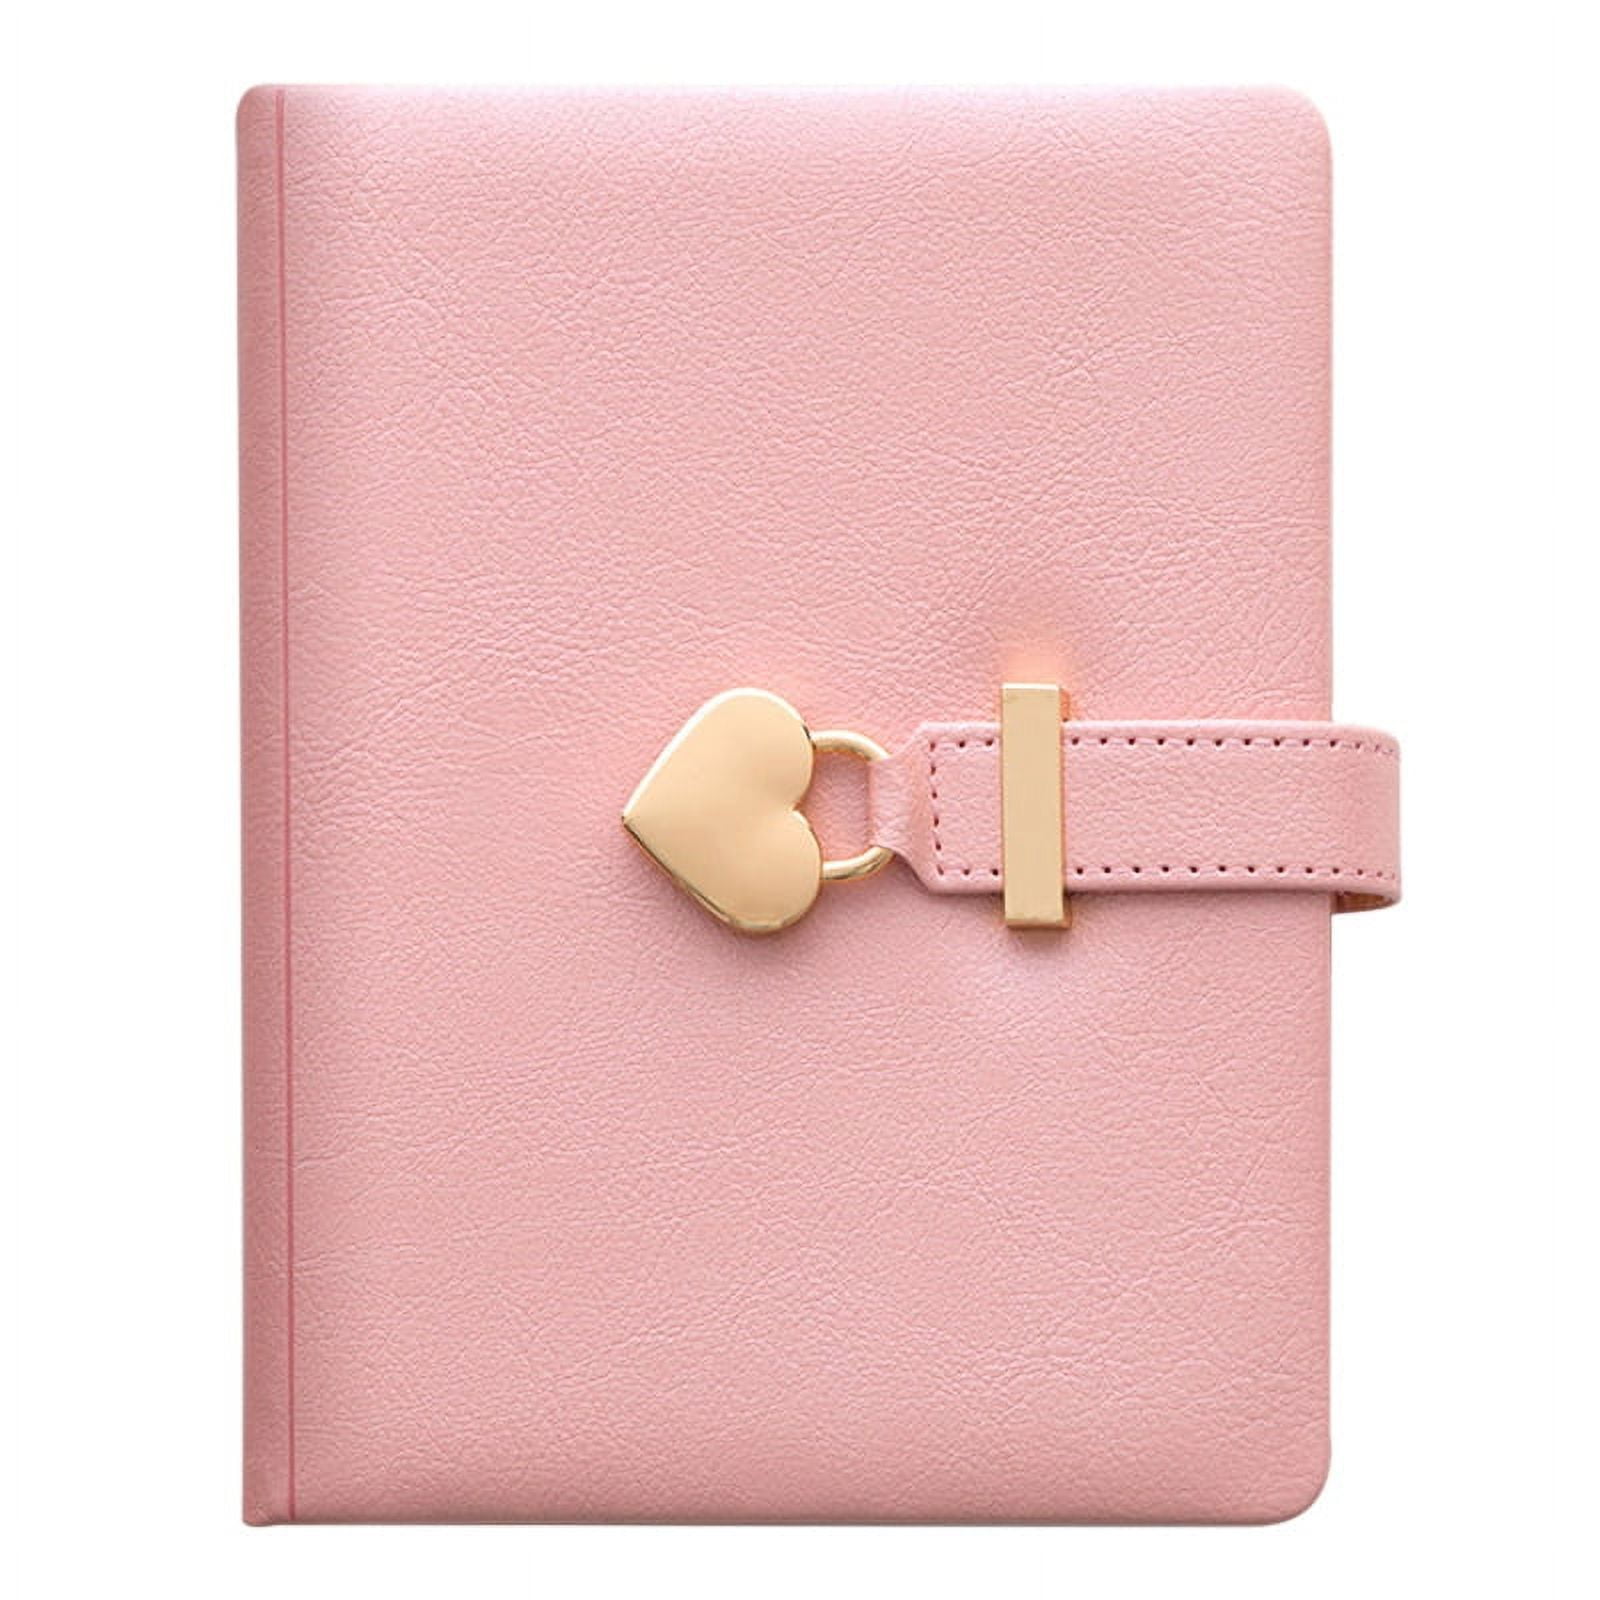 Girls Diary With Lock And Key For Girls Secret Kids Journals For Girls Pink  Heart Locking Journal Faux Leather G